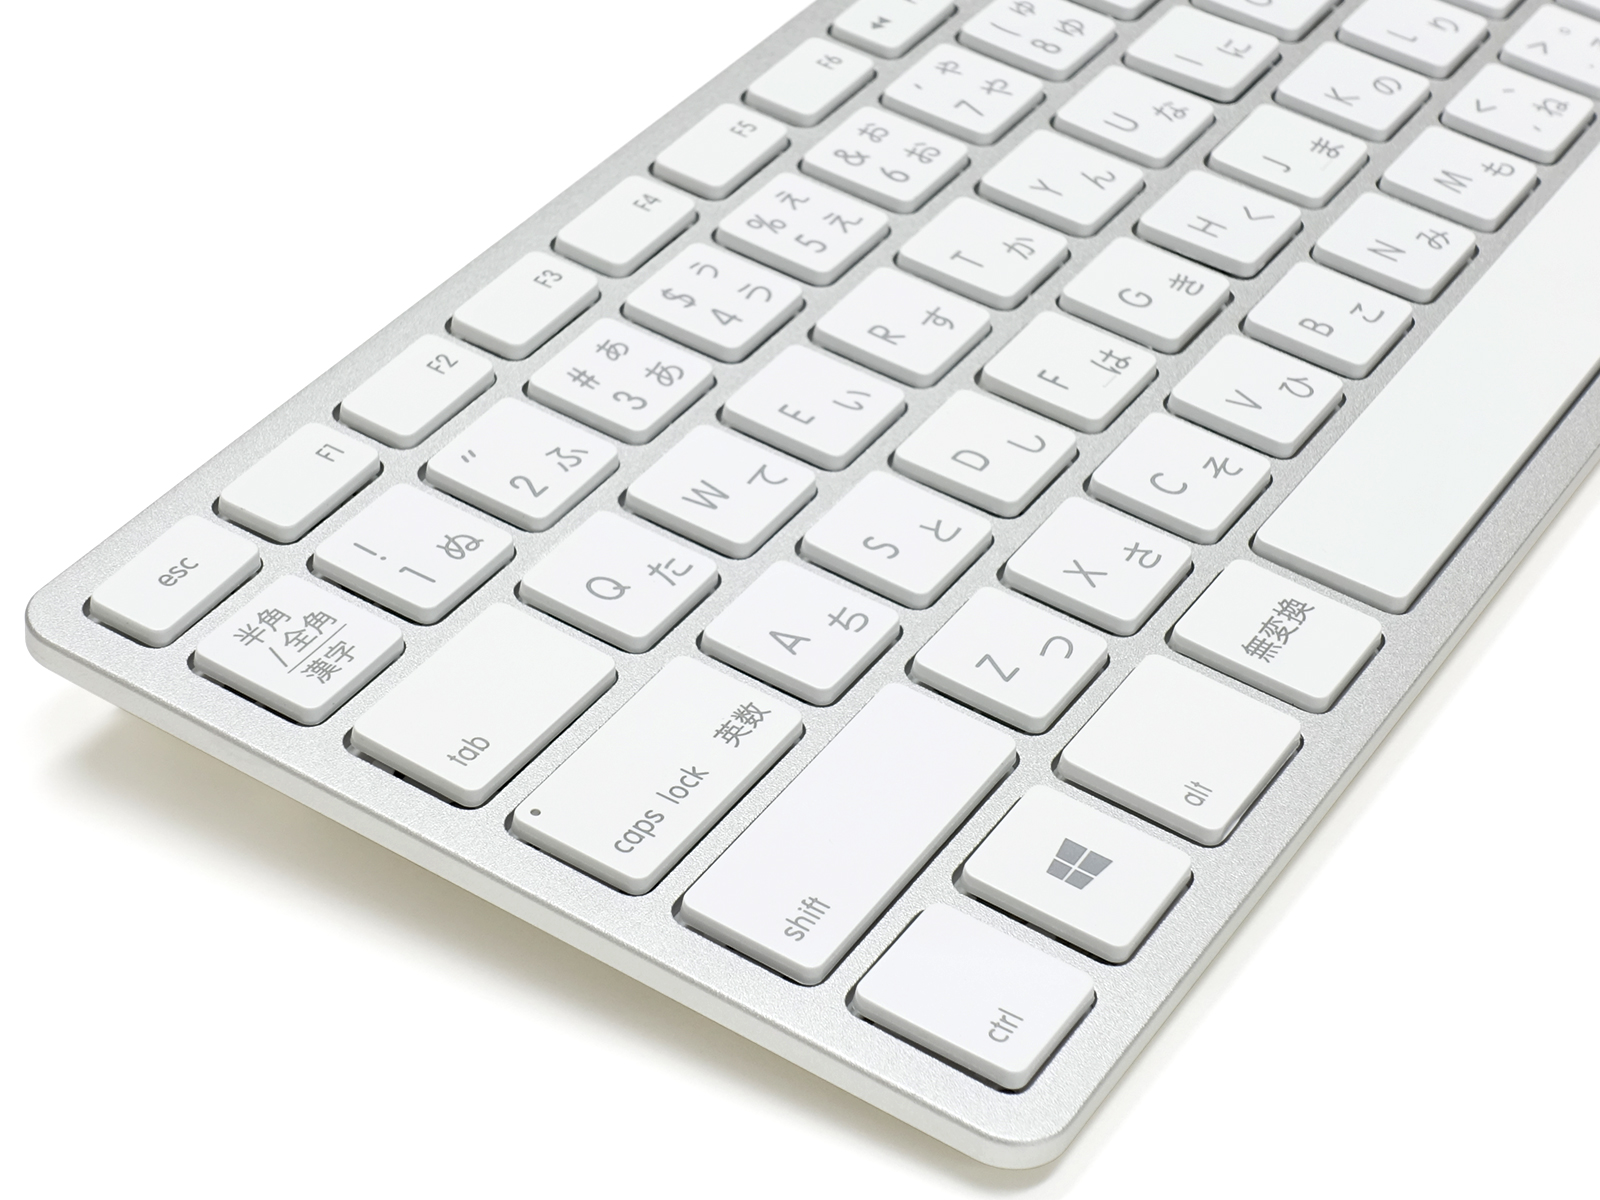 Matias Wired Aluminum Tenkeyless keyboard for PC: image 5 of 6 thumb